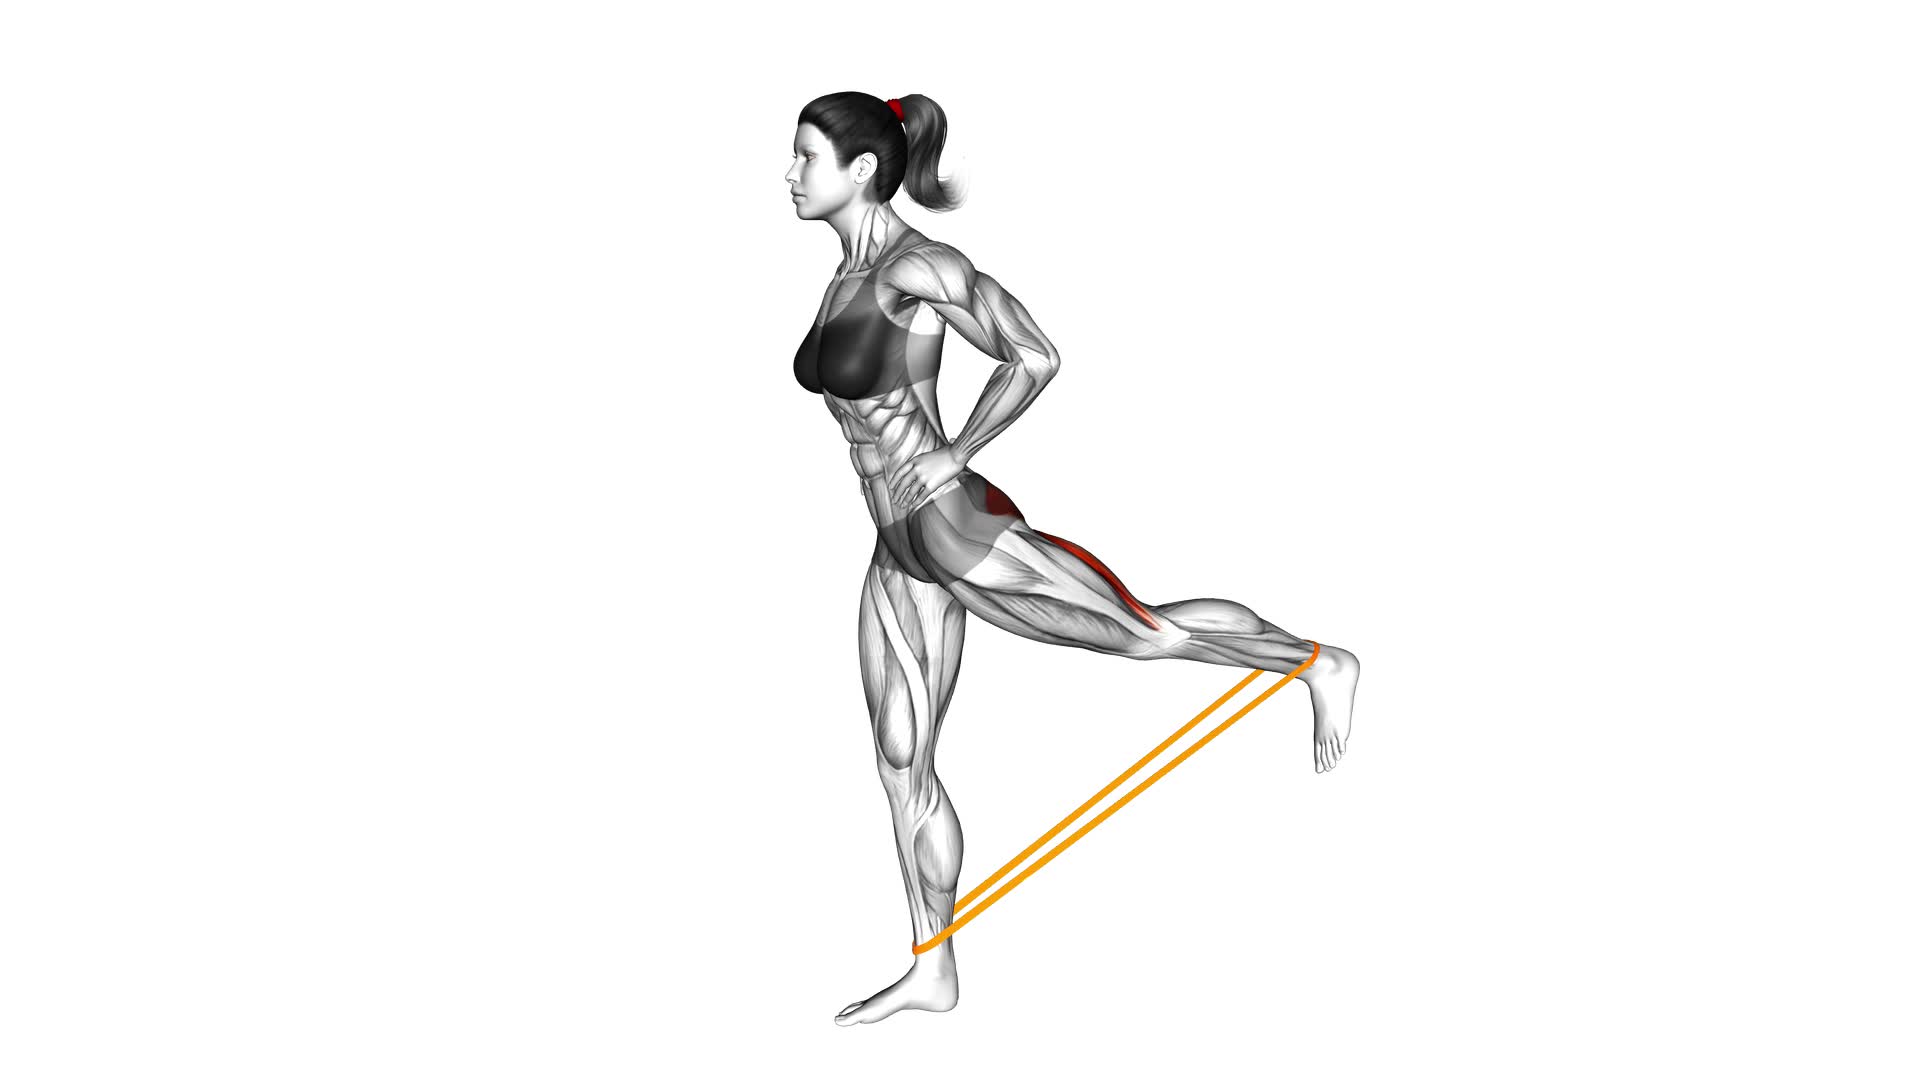 Resistance Band Standing Balance Glute Kickback (female) - Video Exercise Guide & Tips